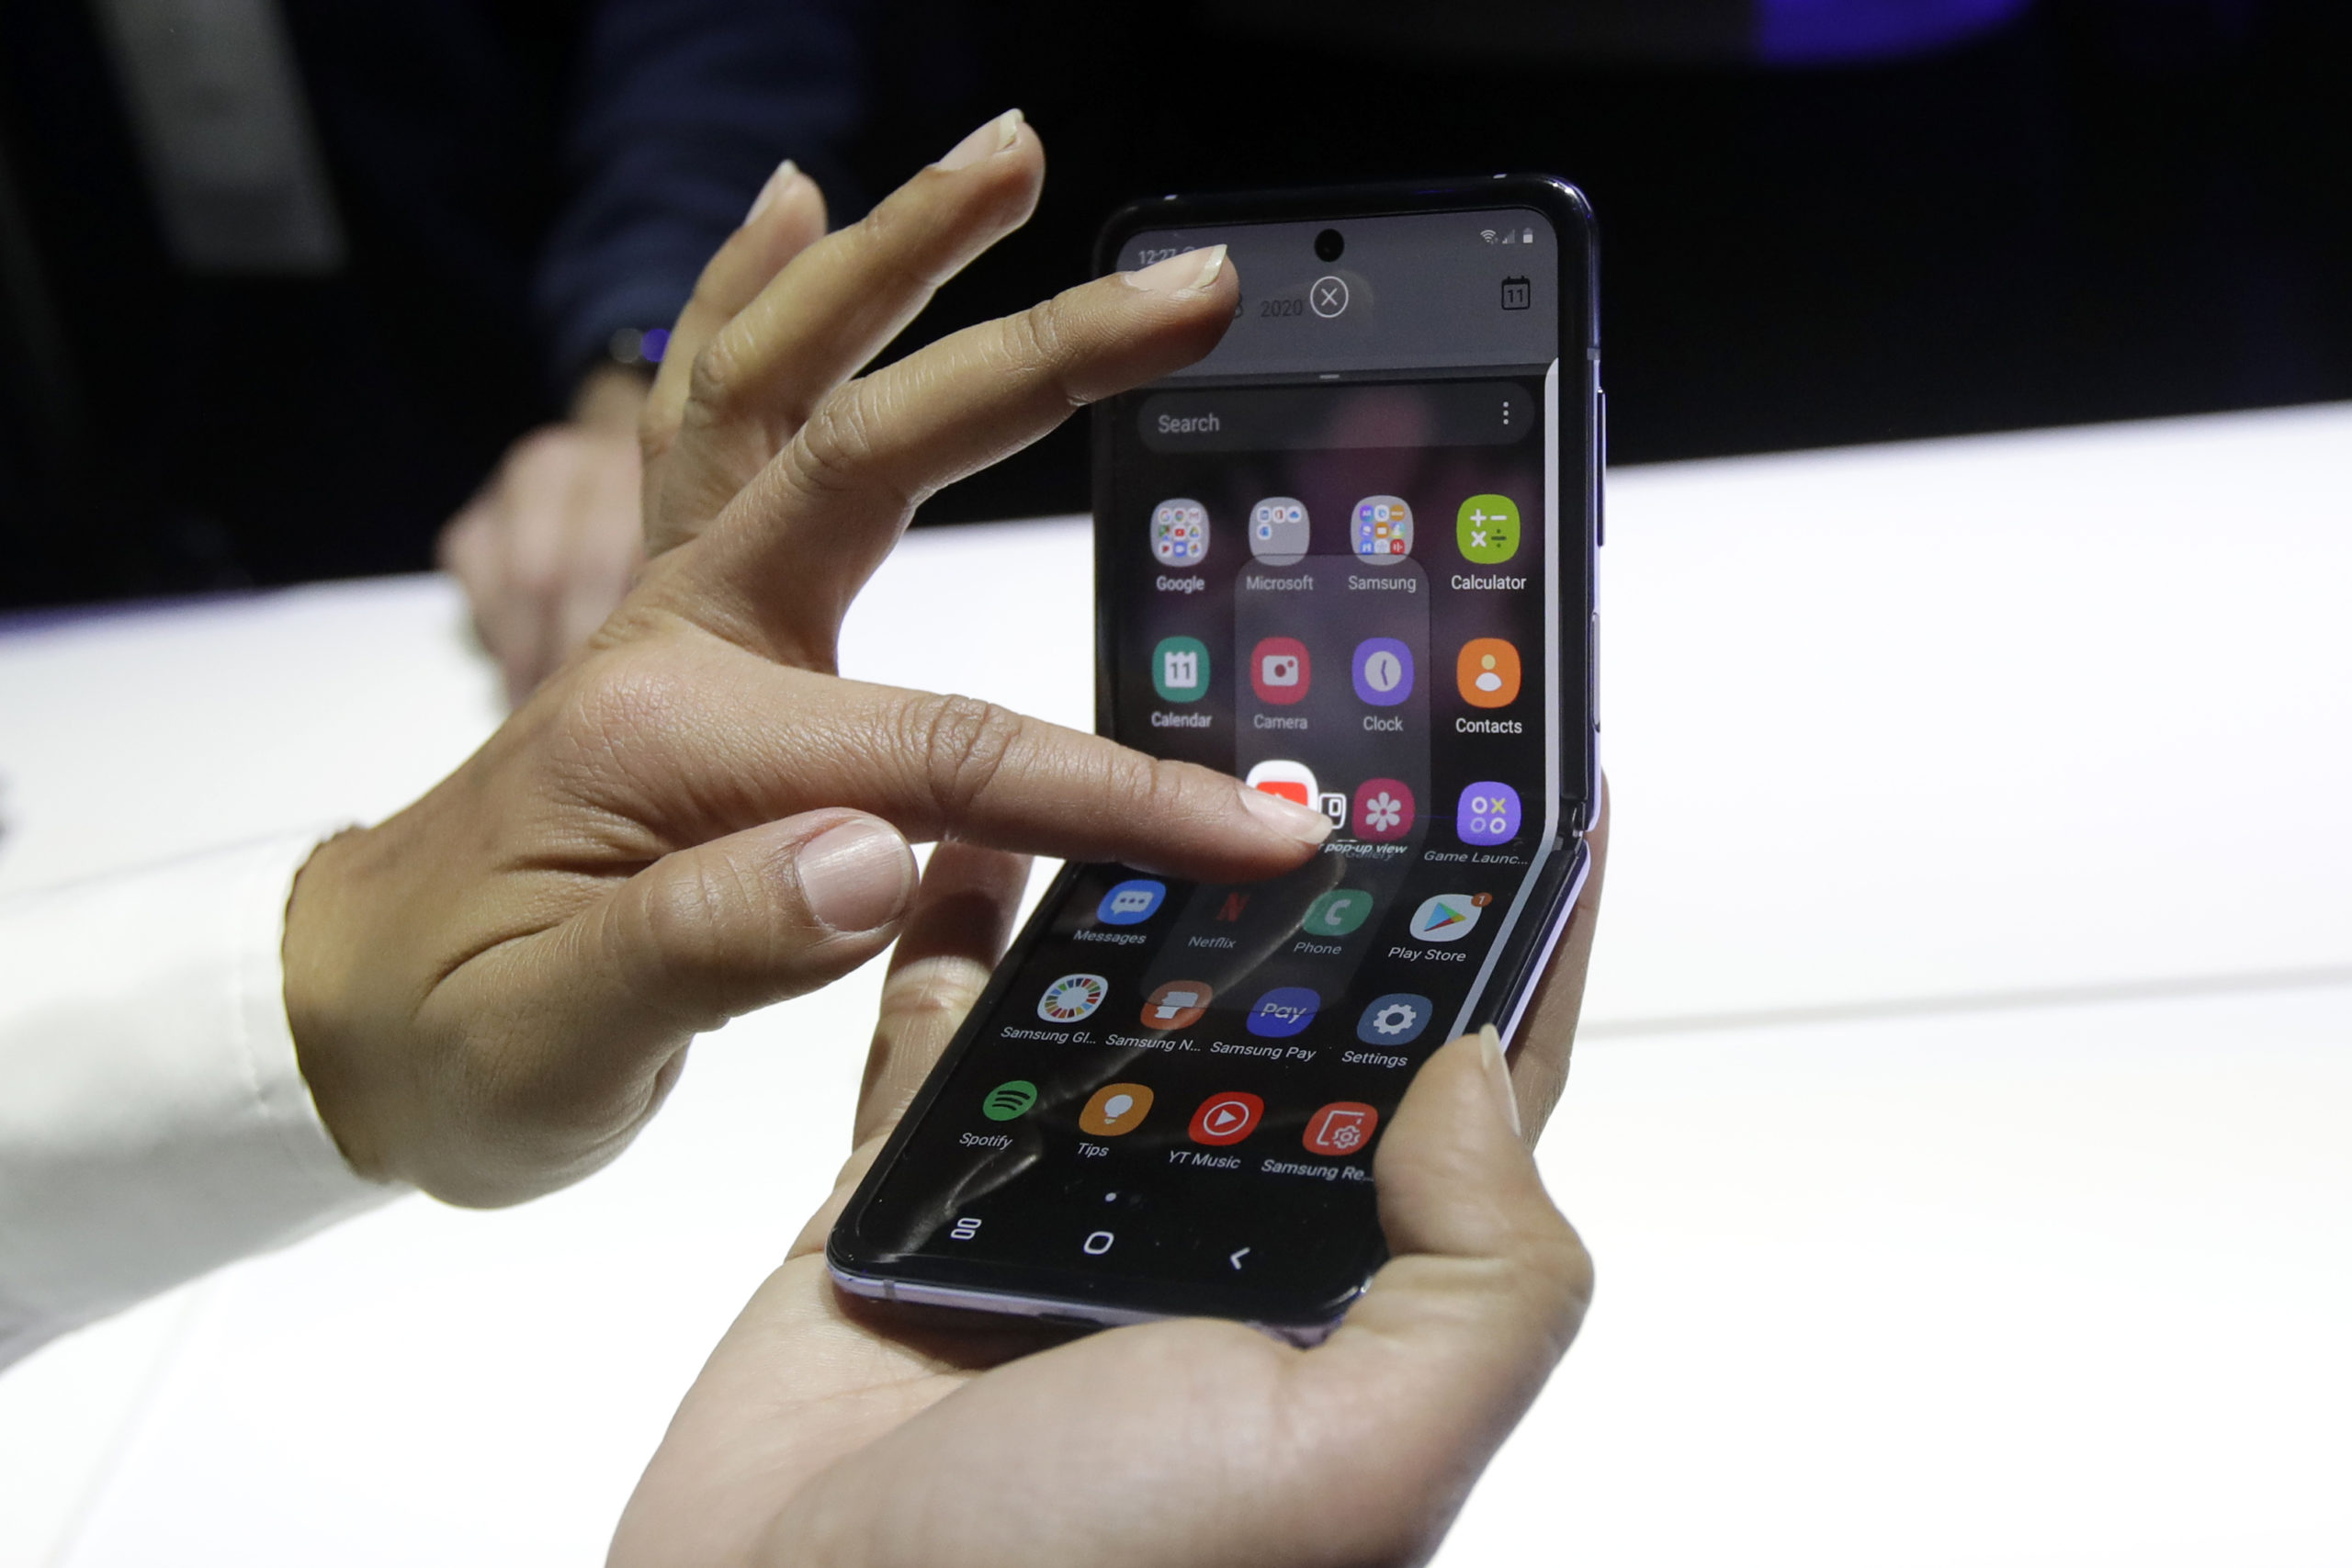 Samsung's new foldable phone Cheaper, but still a novelty Inquirer